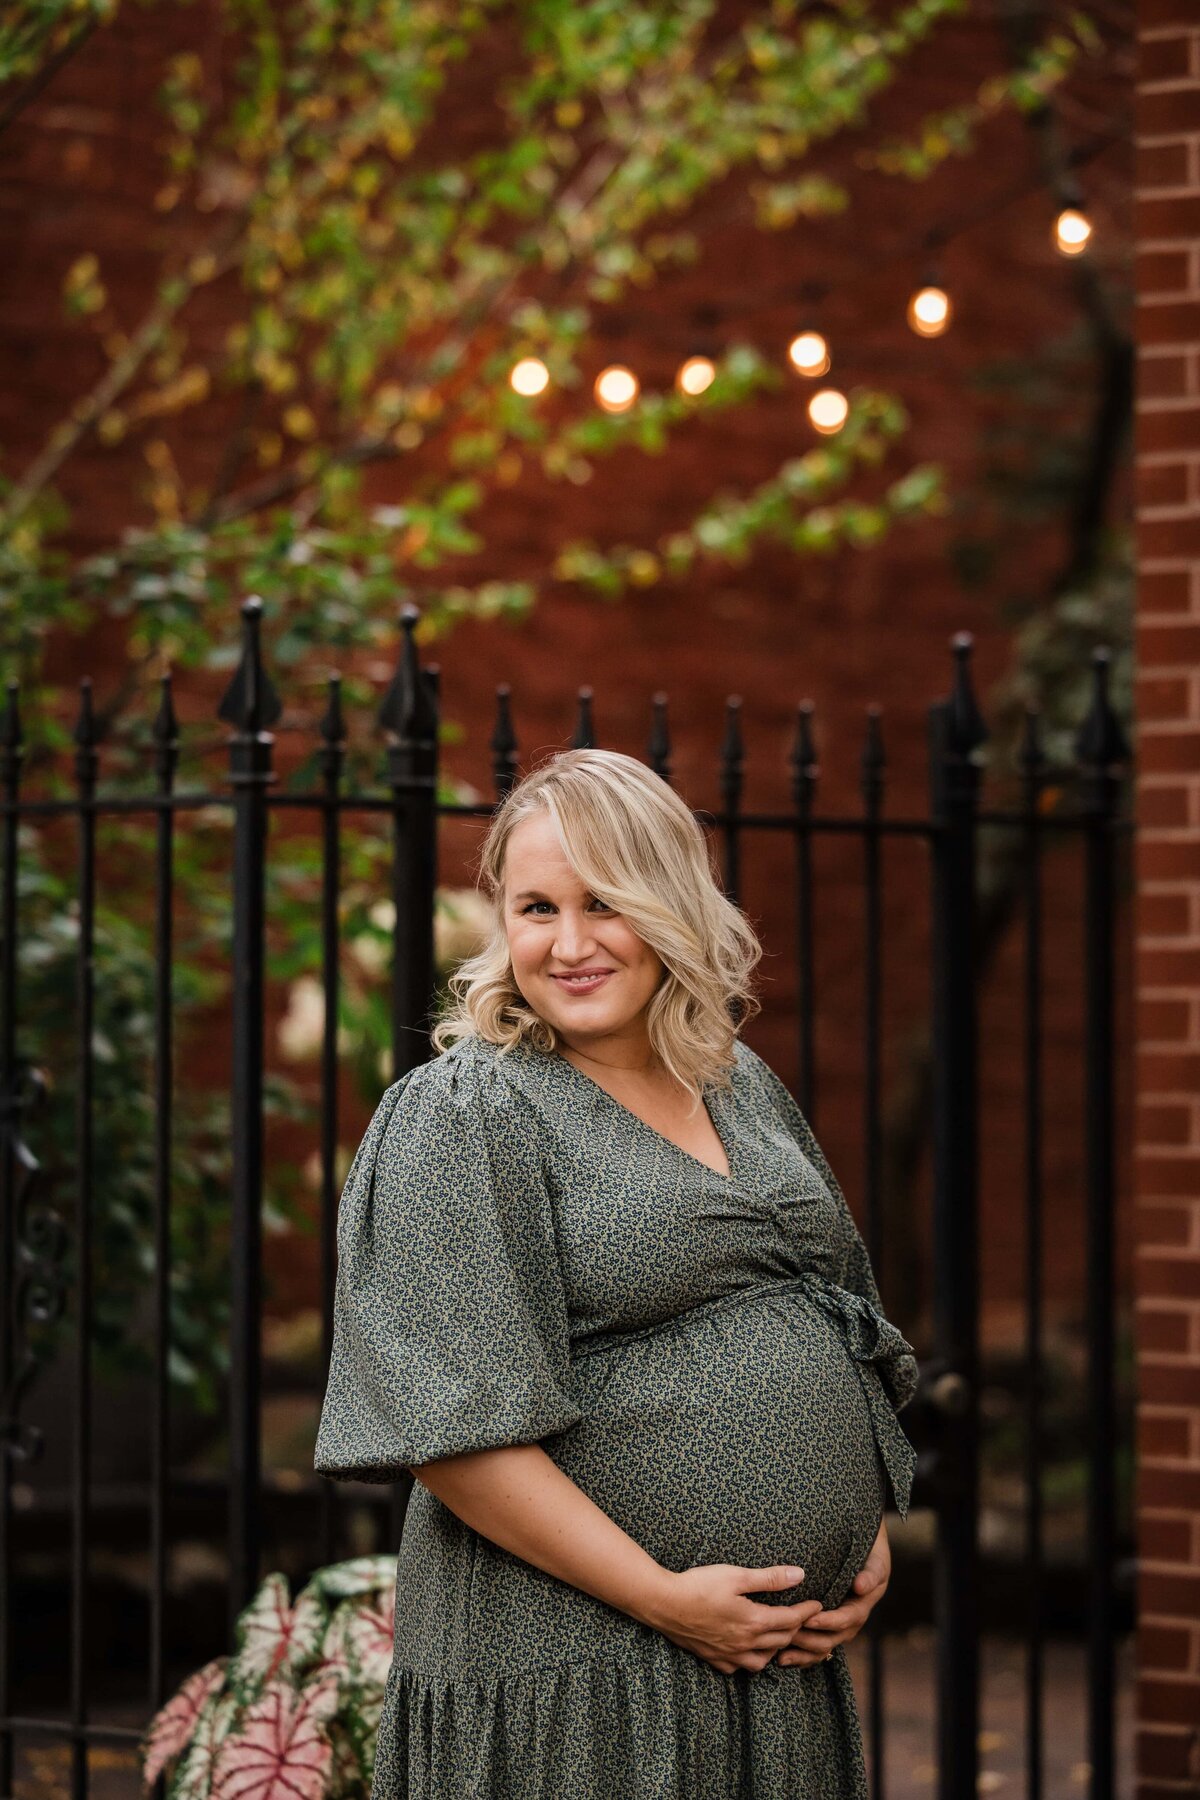 Pregnant woman smiling outdoors with a hand on her belly, captured by a maternity photographer in Pittsburgh, standing by a black fence with string lights in the background.